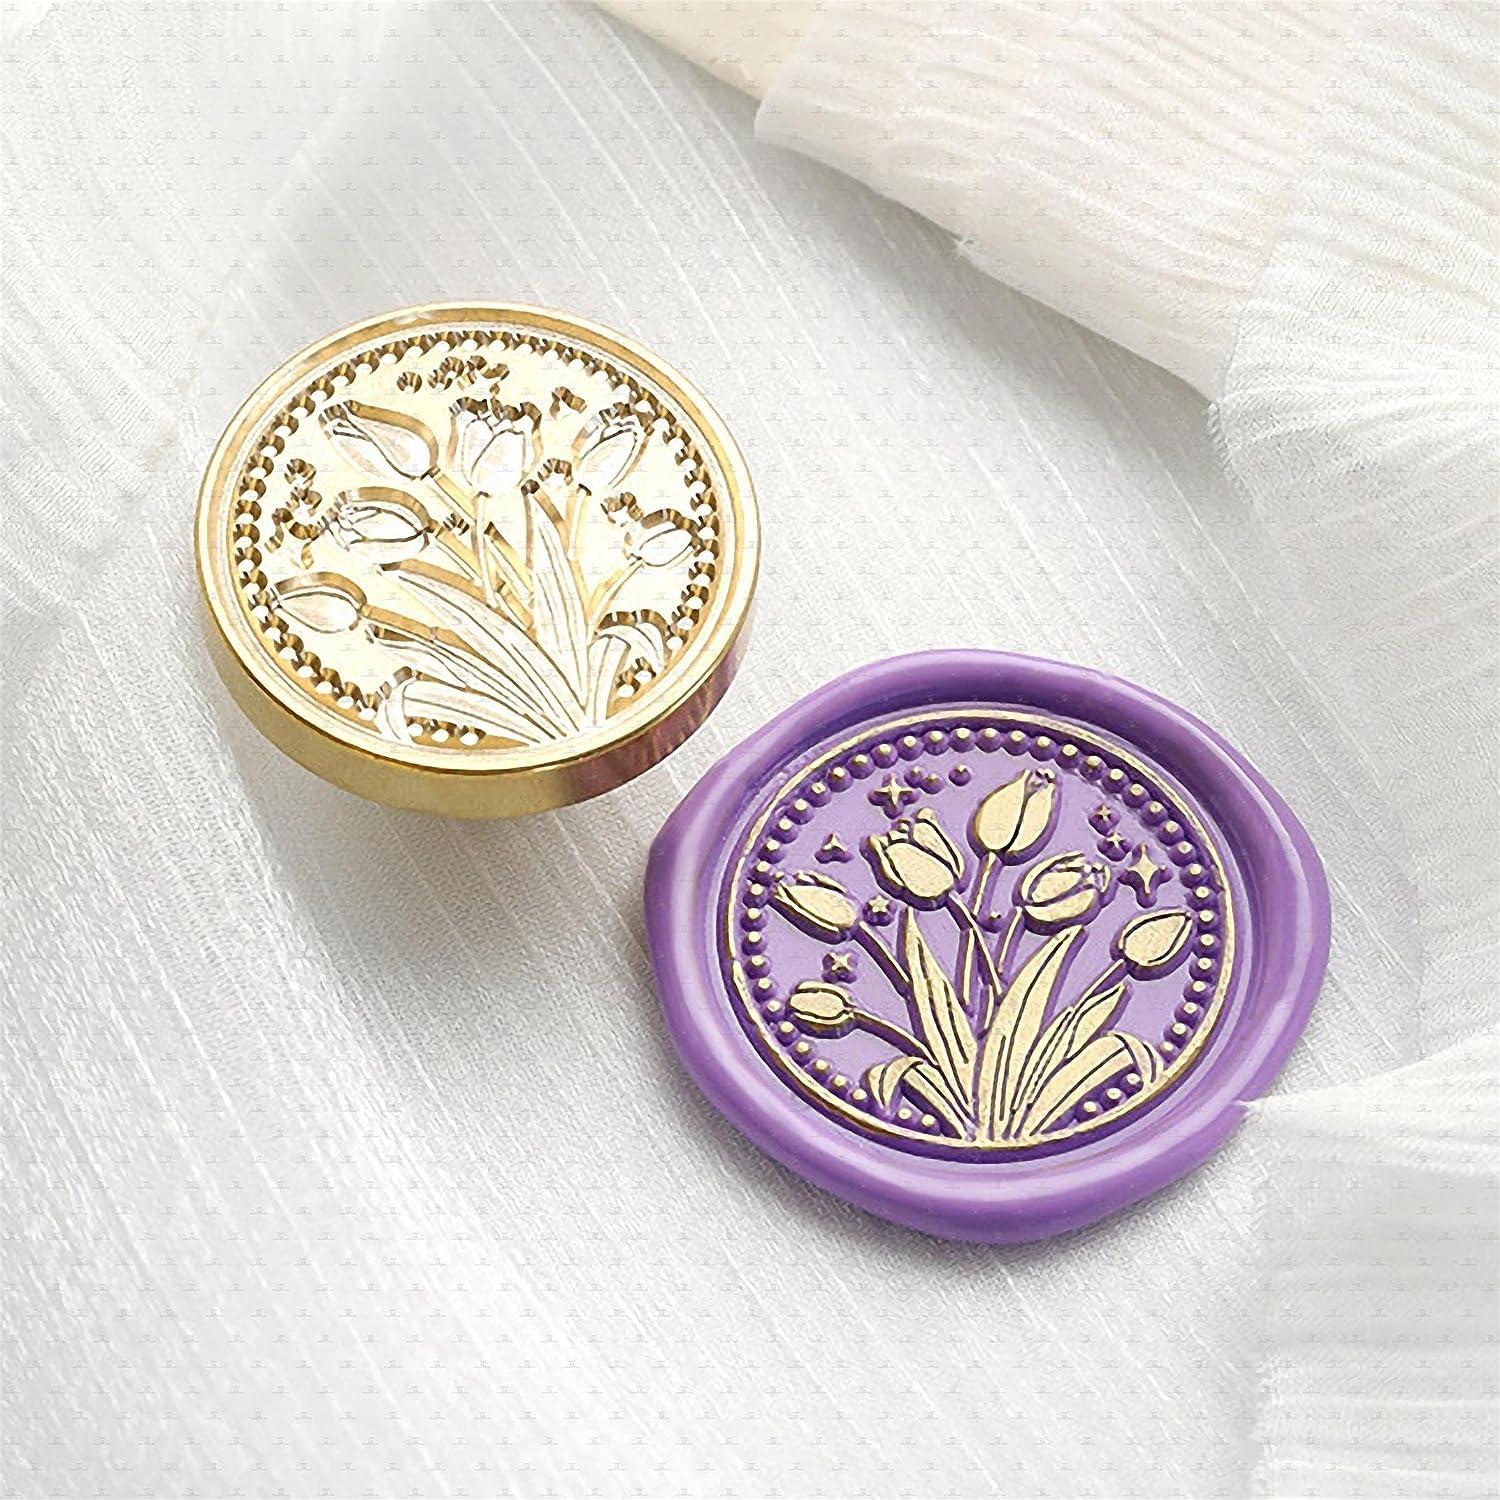 Custom Your Own Logo Wax Seal Stamp Wedding Birthday Gift Wax Seal Stamp  Set - China Wax Seal Stamp and Wax Stamp Seal Set price